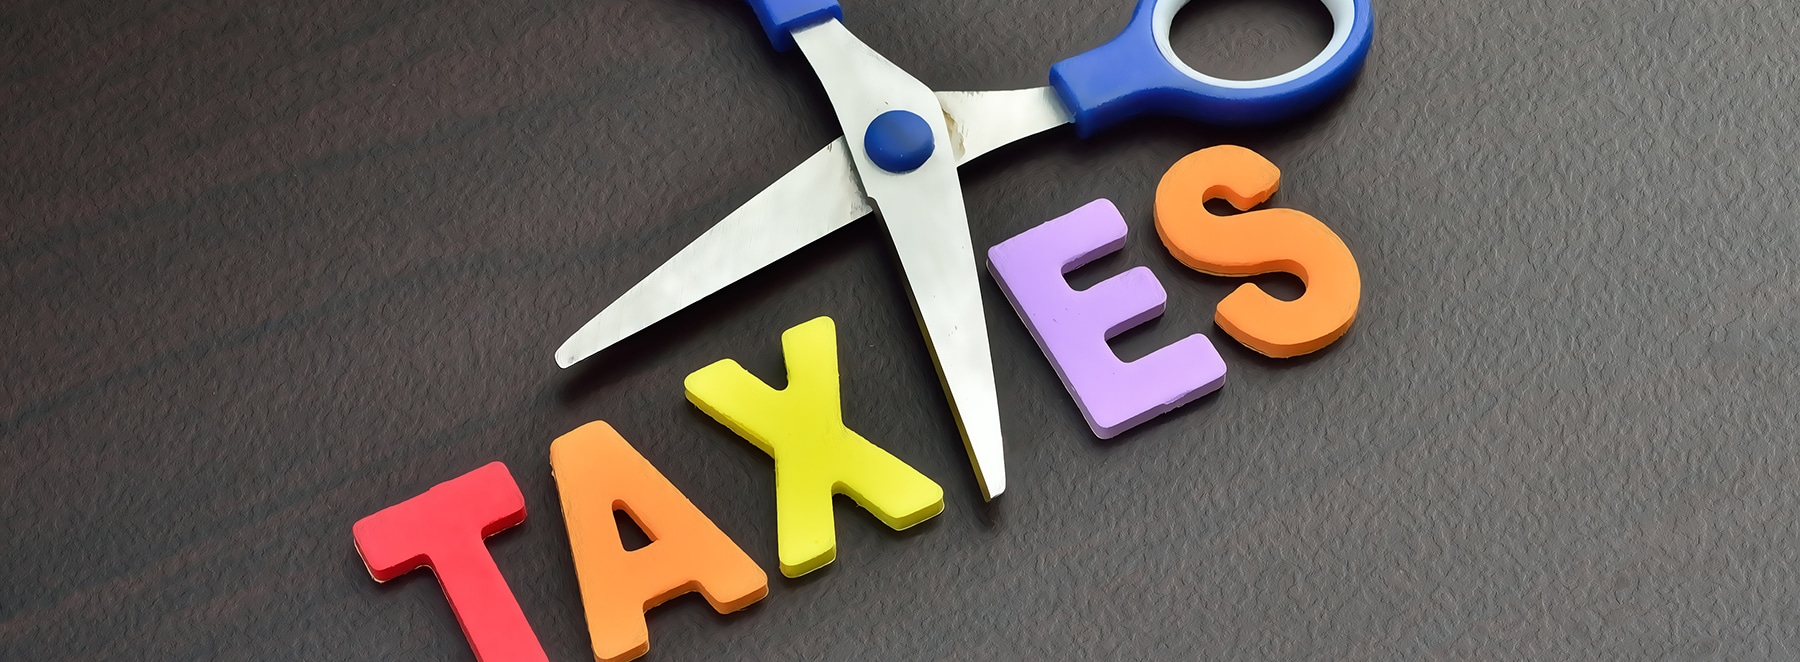 Cut Your Taxes, abstract image showing the word tax being cut in two, symbolic of tax reductions.